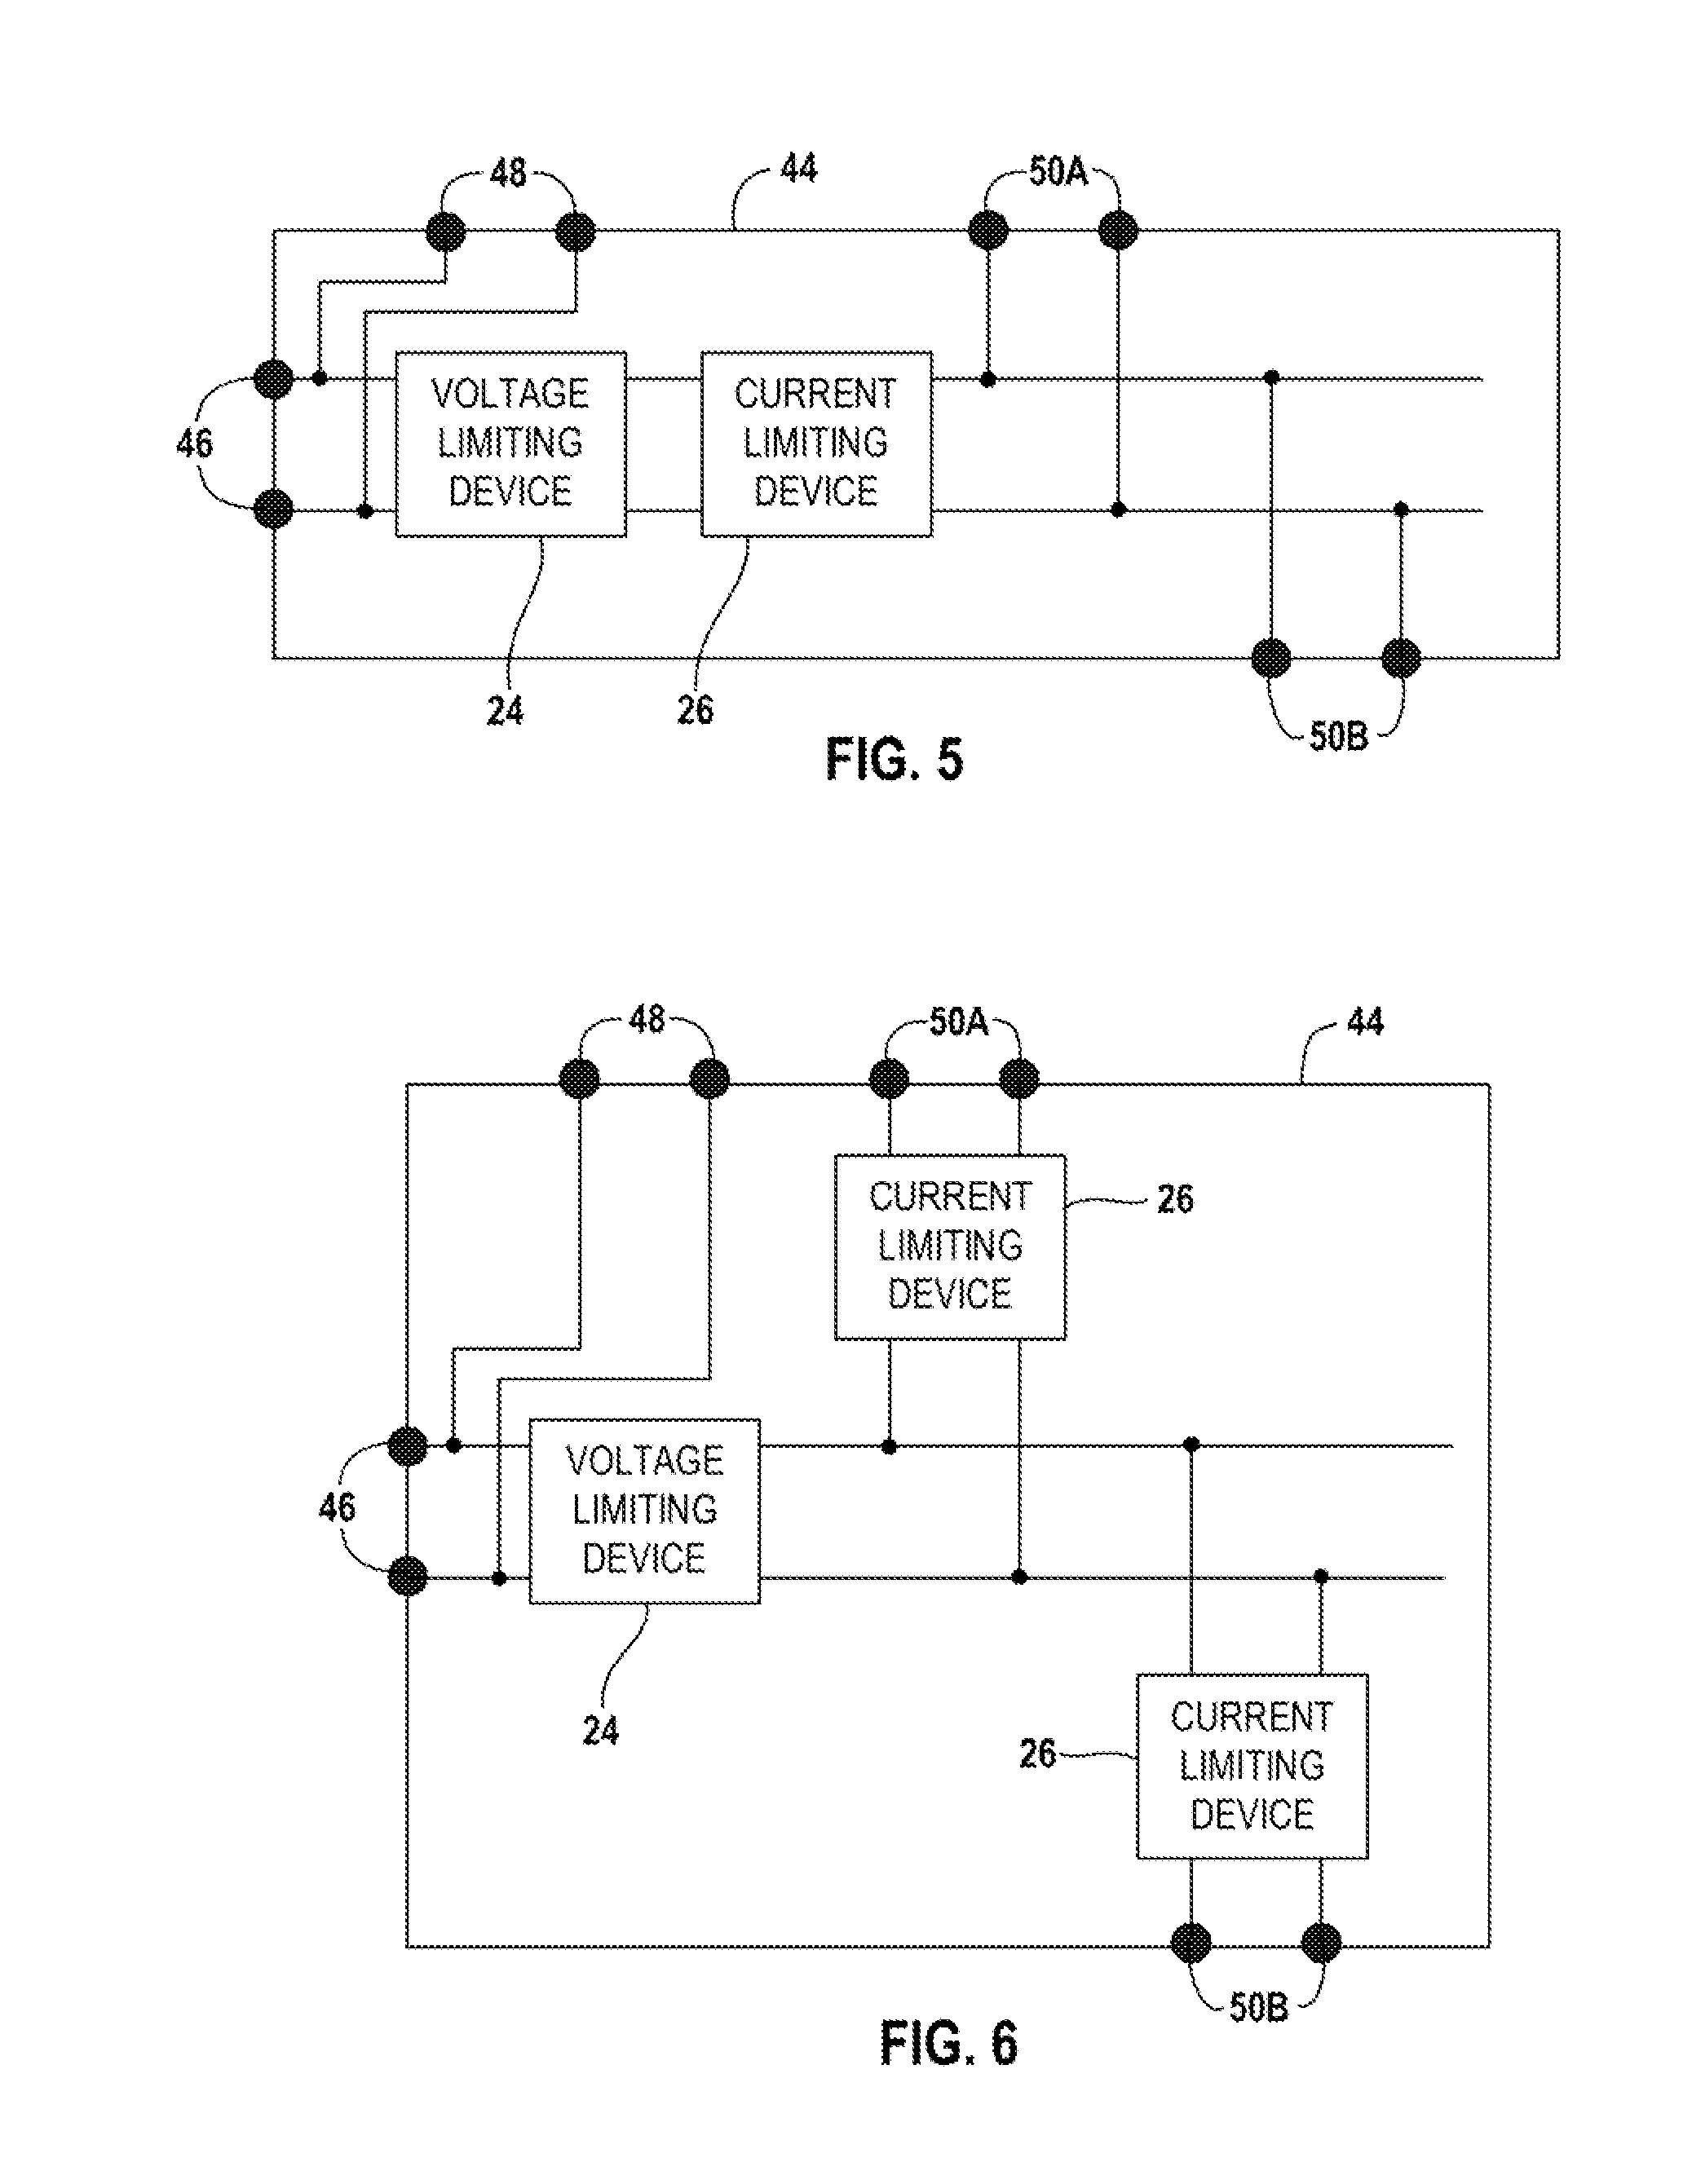 Voltage Limiting Device for Use in a Distributed Control System